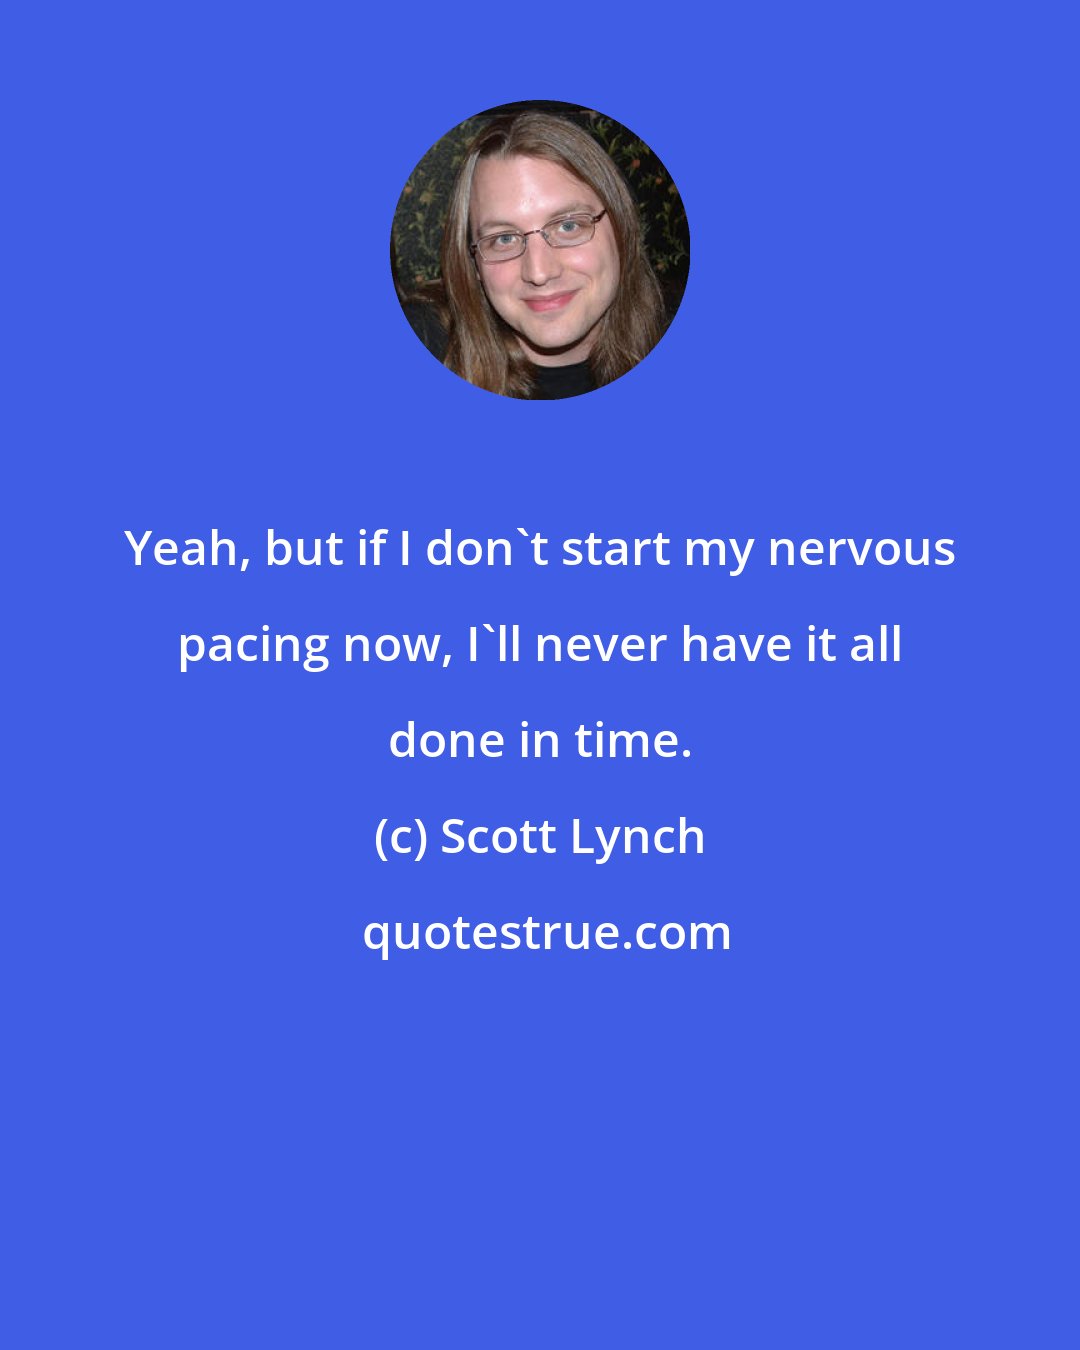 Scott Lynch: Yeah, but if I don't start my nervous pacing now, I'll never have it all done in time.